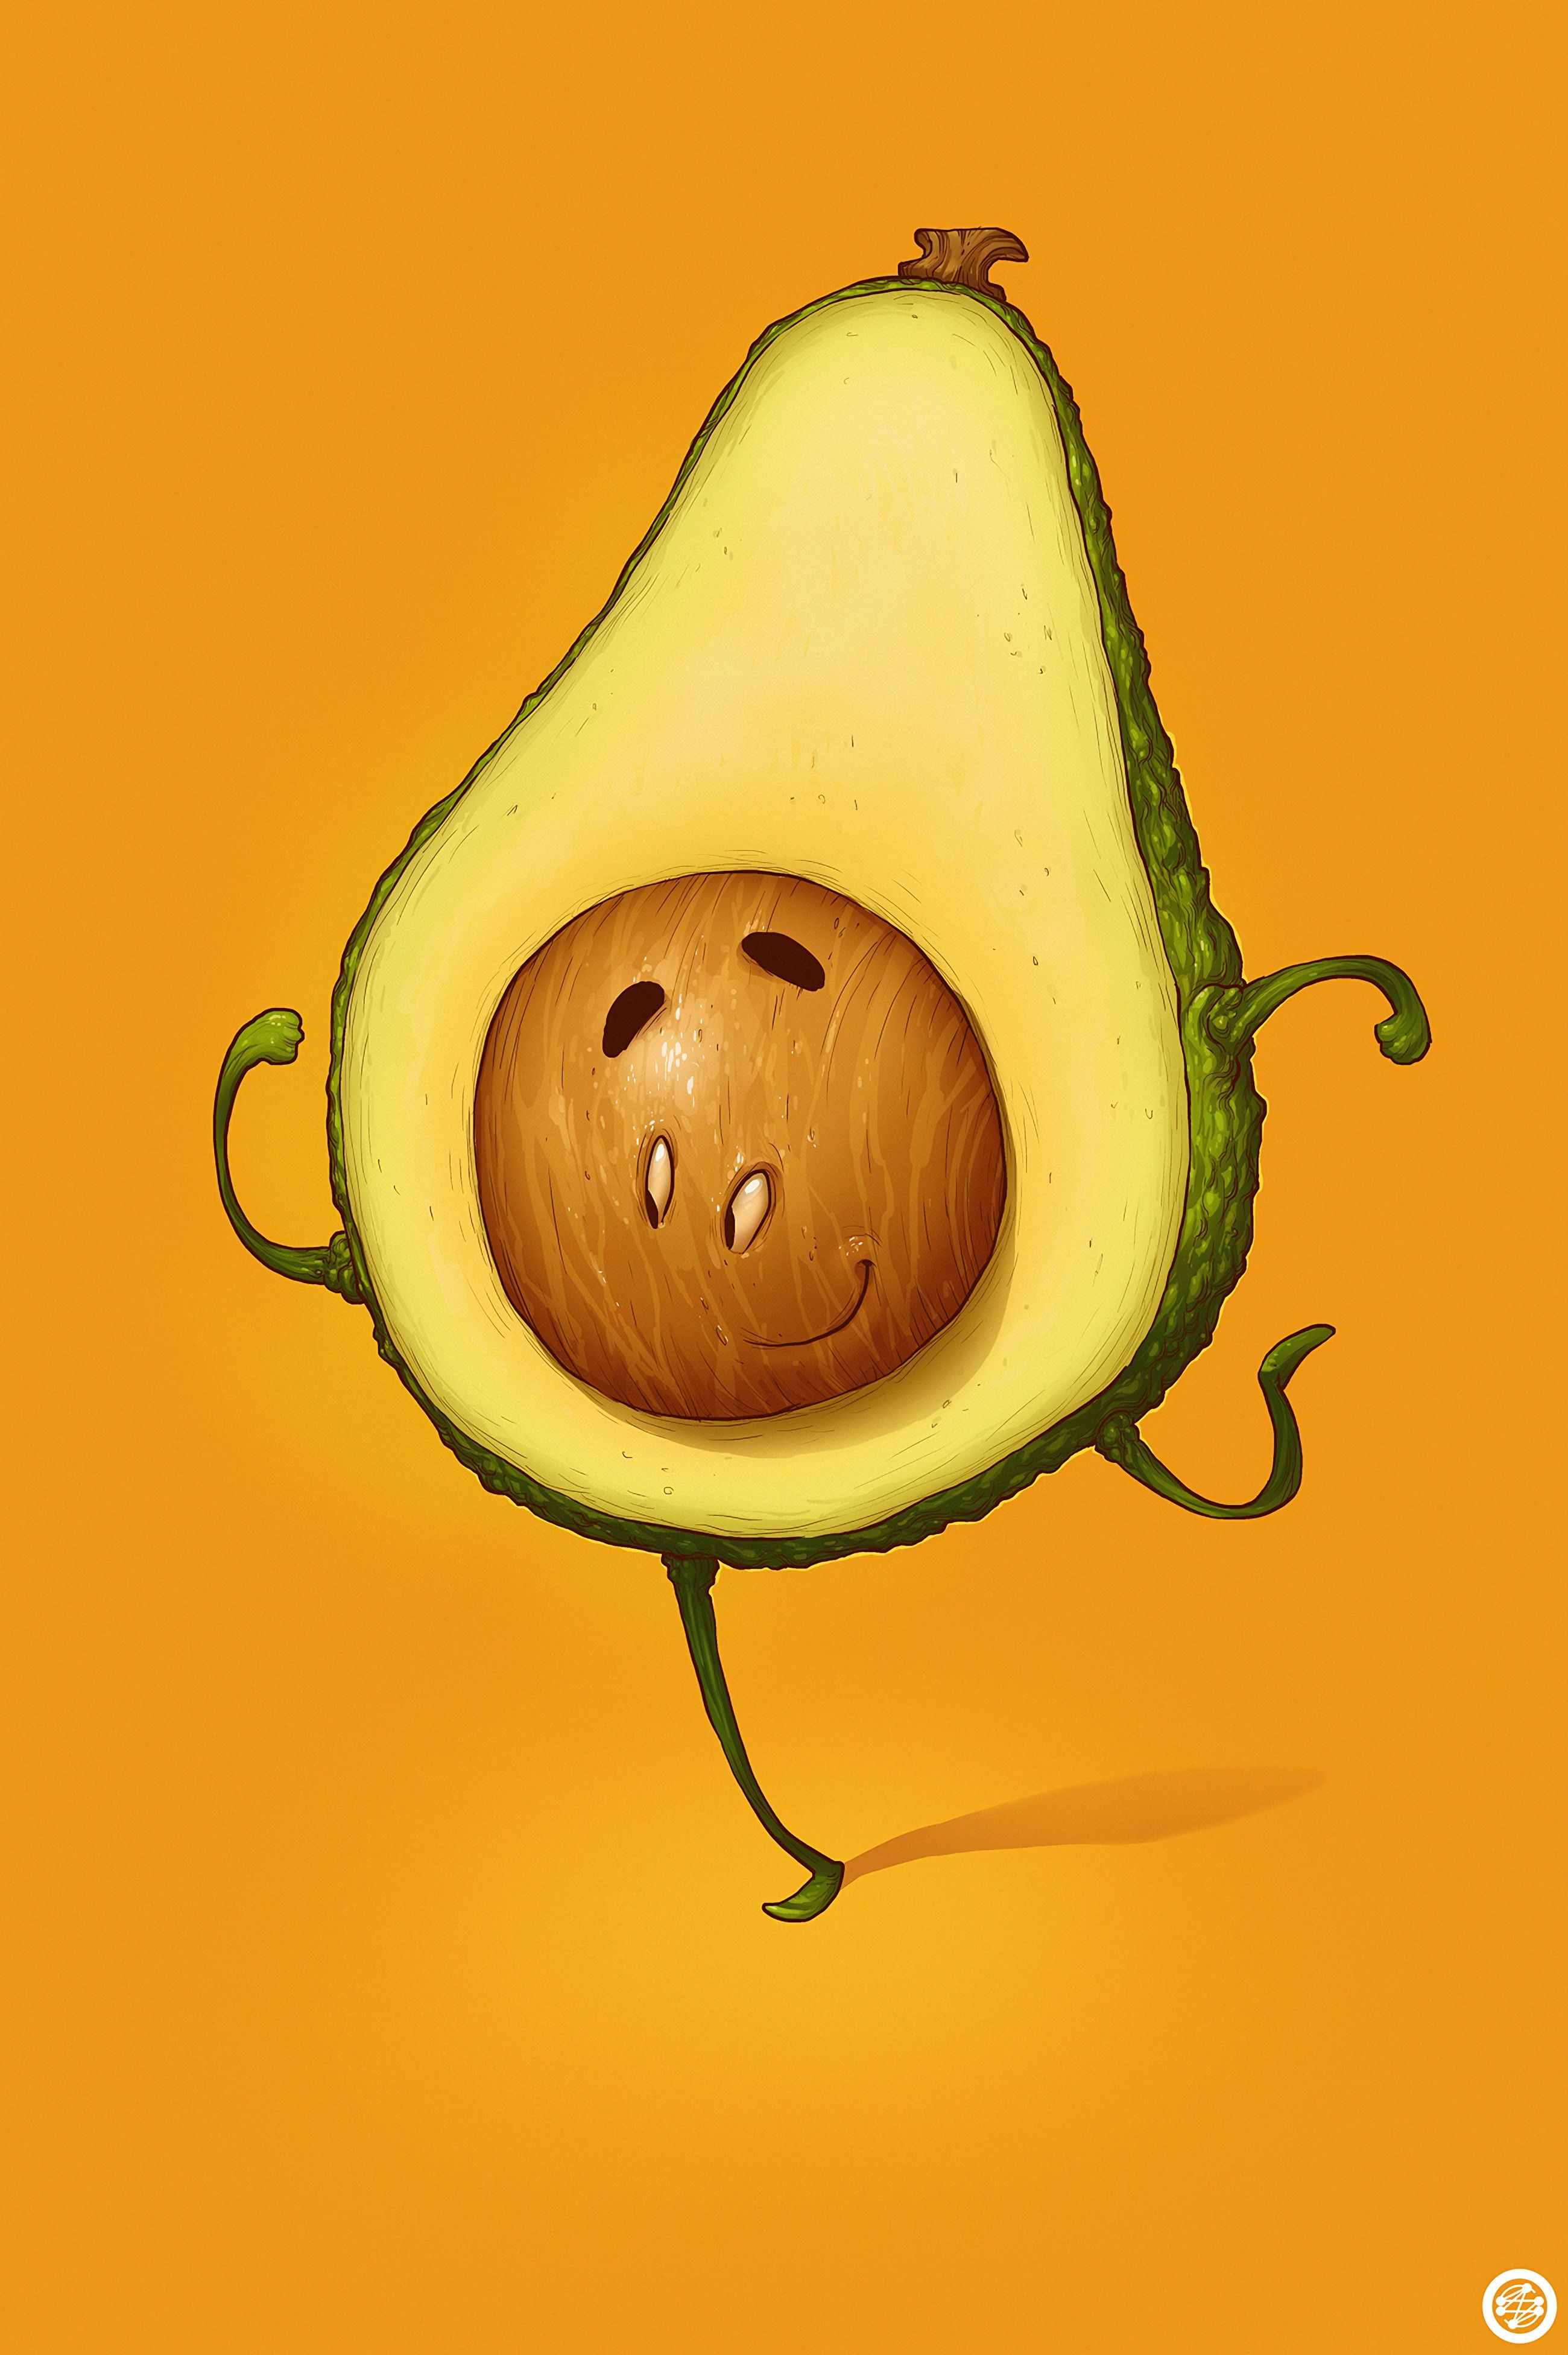 Mobile wallpaper: Smalik, Avocado, Funny, Art, Smile, 59496 download the picture for free